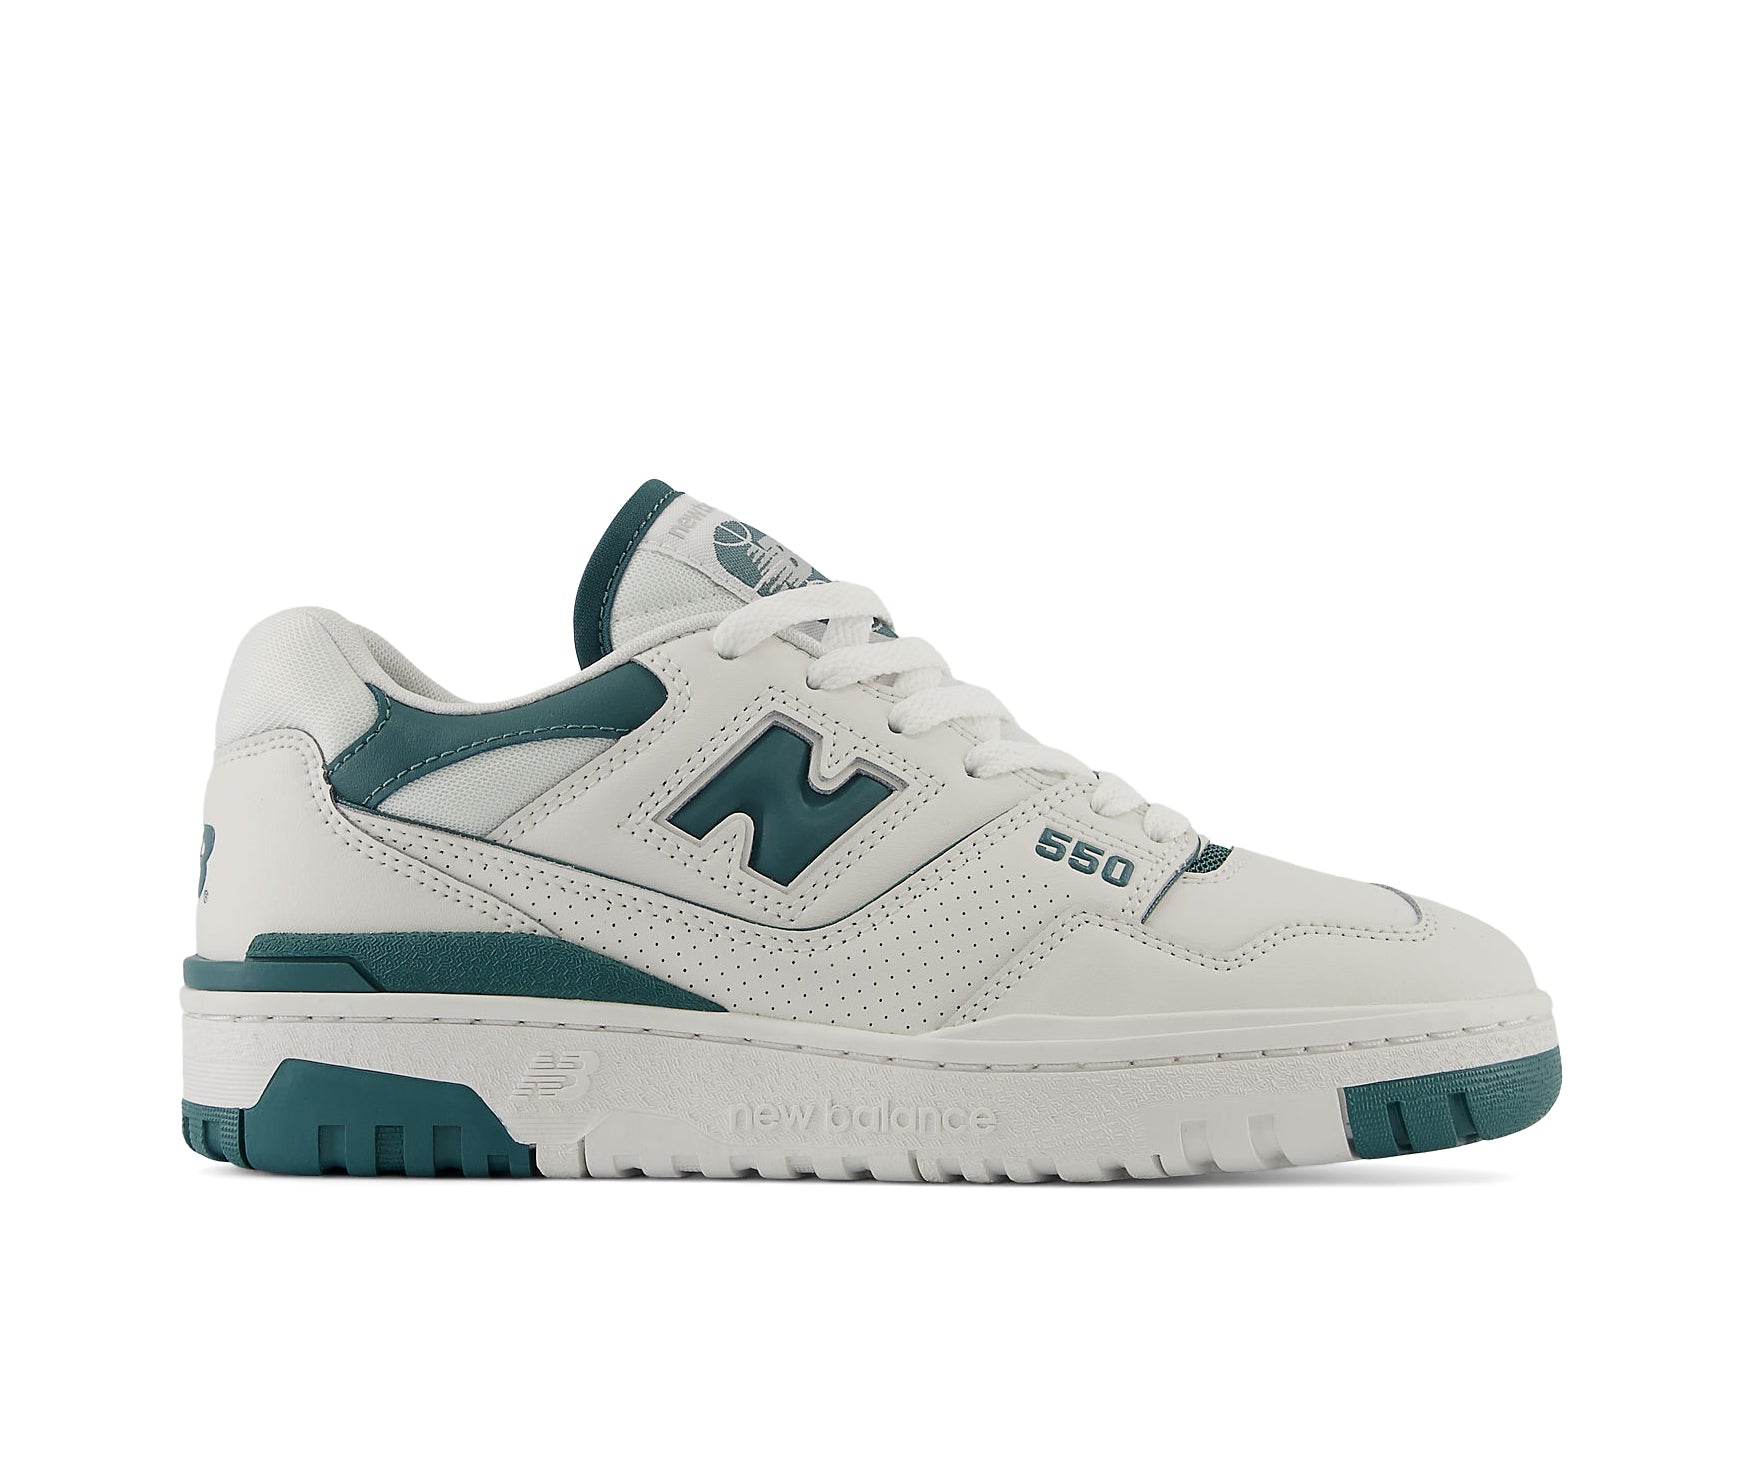 A white and teal leather basketball sneaker from New Balance.